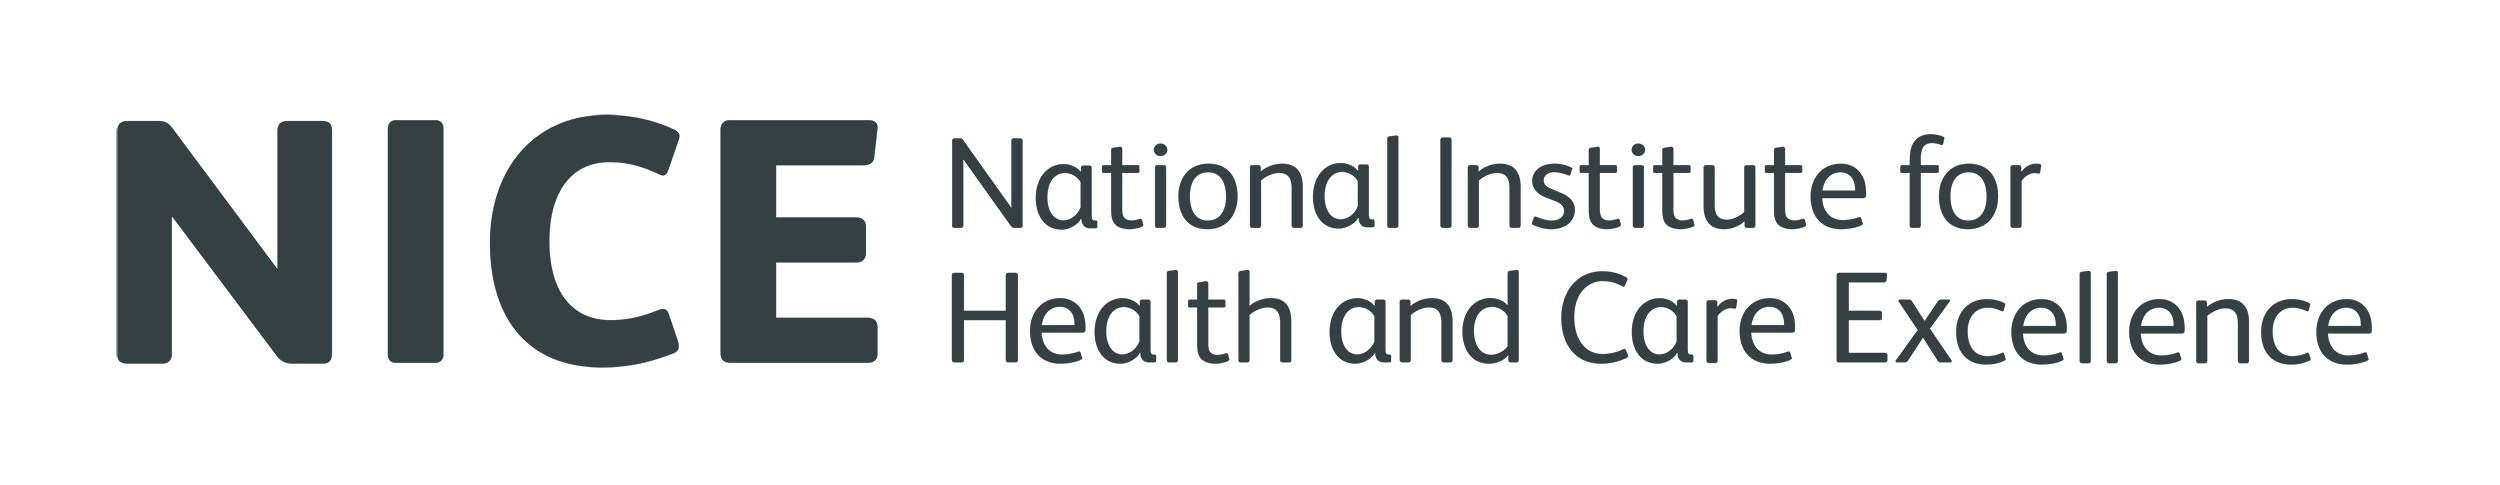 NICE - National Institute for Health and Care Excellence Logo